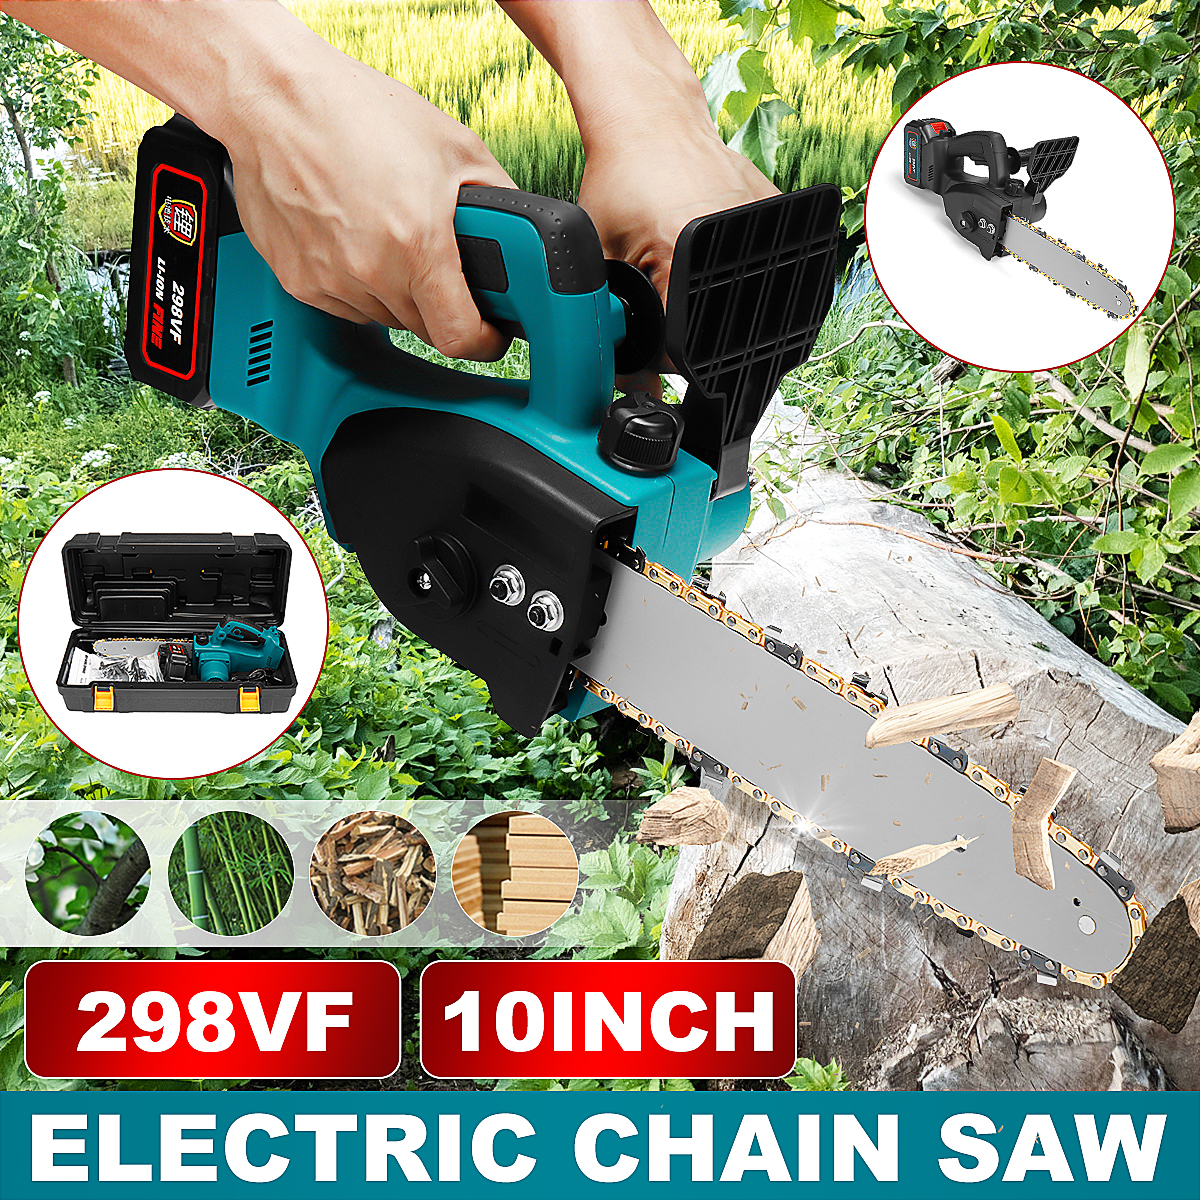 10inch-298VF-Cordless-Electric-Chain-Saw-Handheld-Chainsaw-Wood-Tree-Cutter-W-12pcs-Battery-1833237-1